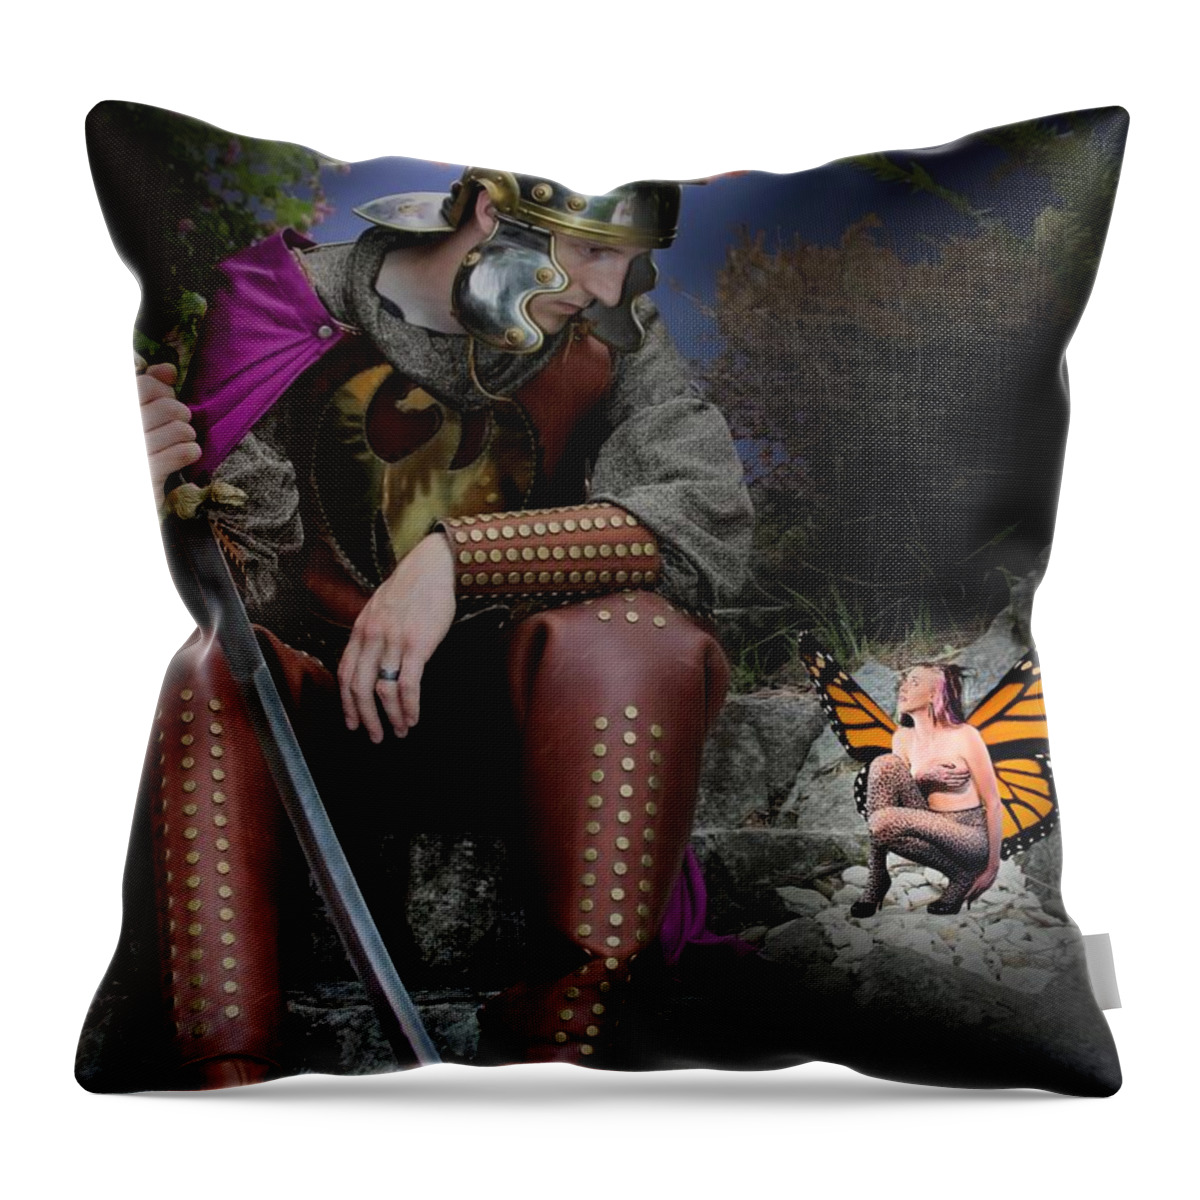 Fairy Throw Pillow featuring the photograph Not Funny by Jon Volden